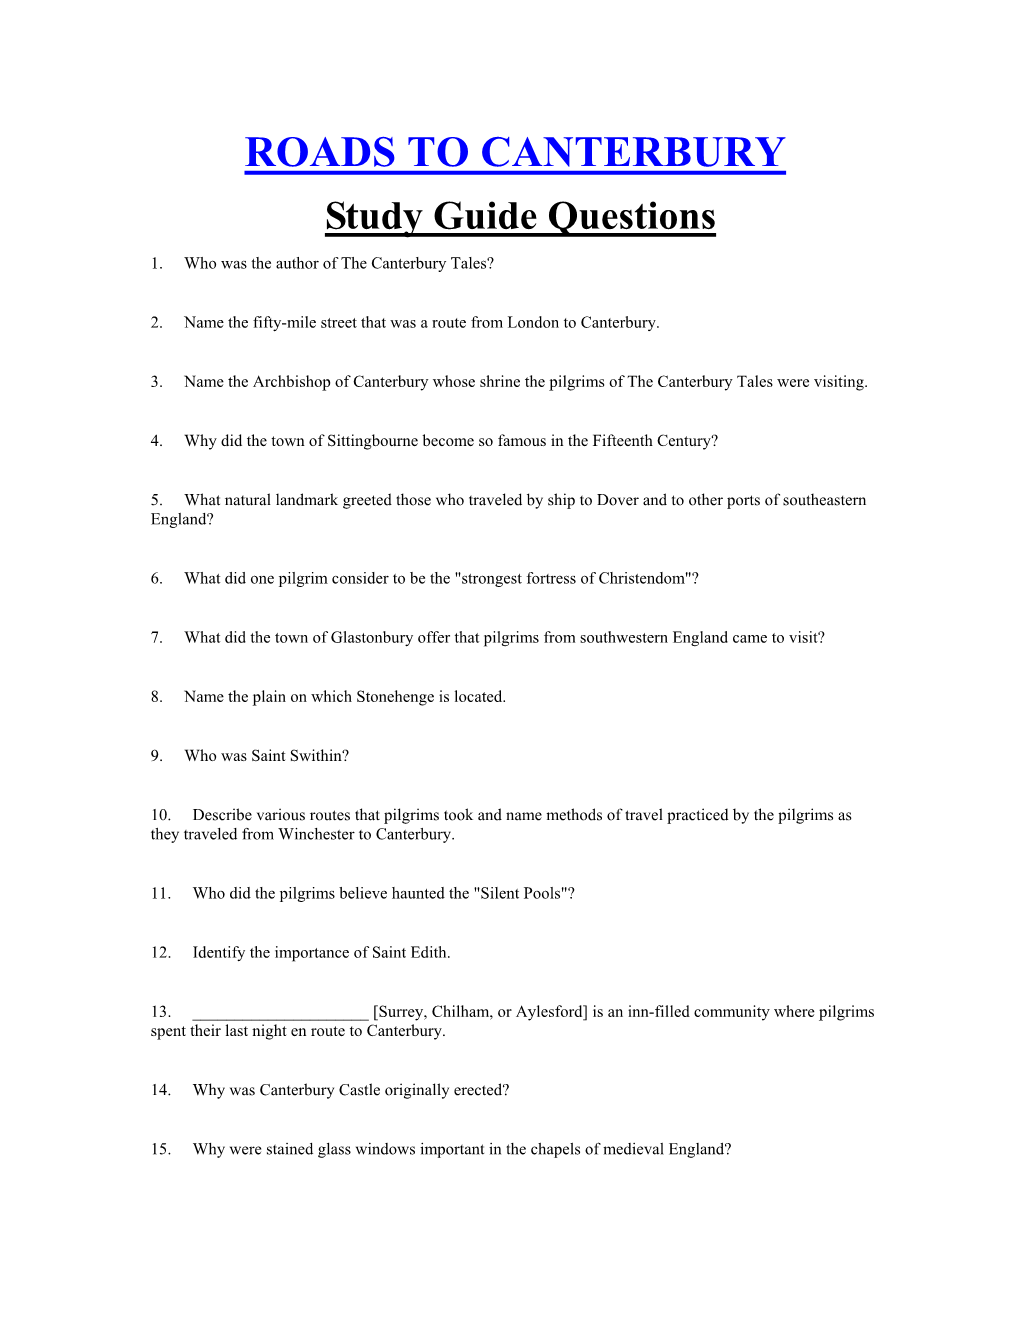 ROADS to CANTERBURY Study Guide Questions